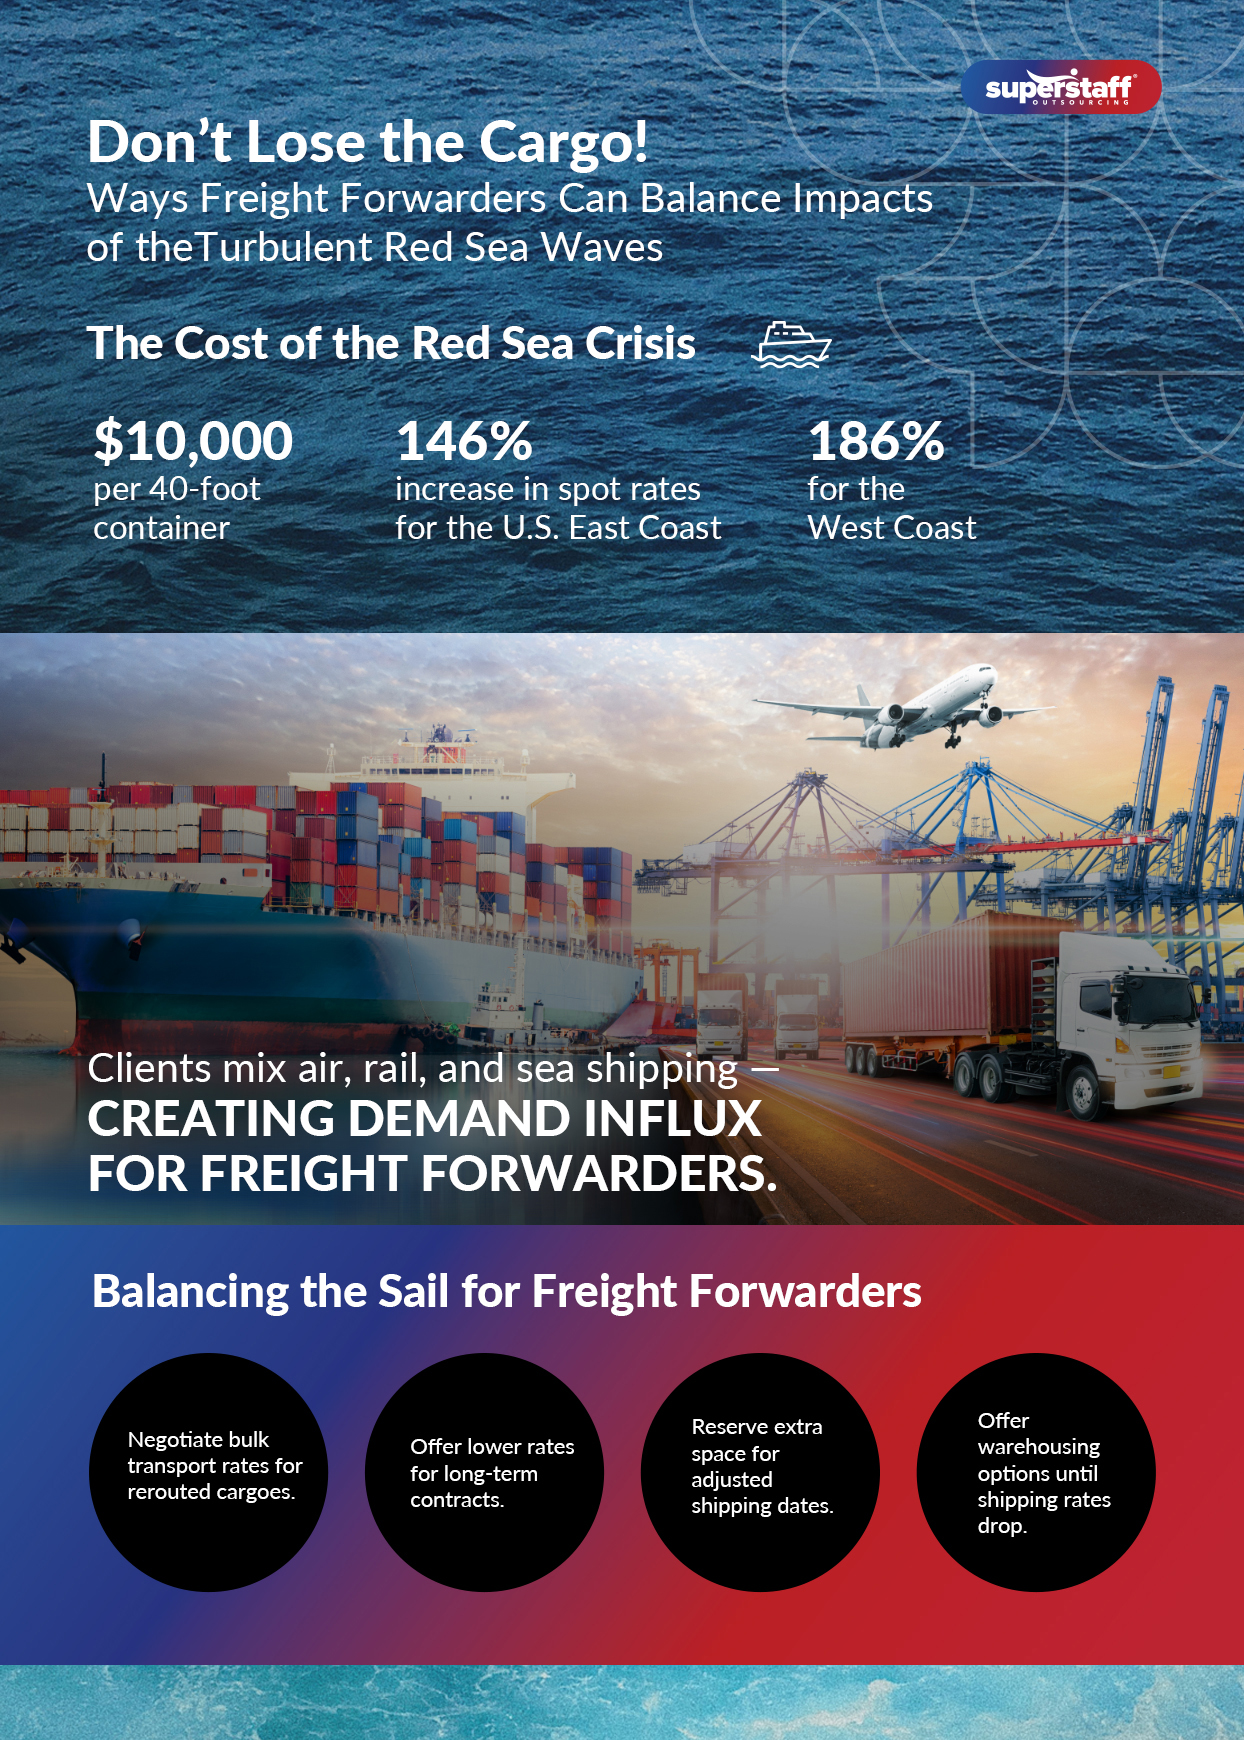 An infographic shows impact of the Red Sea crisis on the logistics.